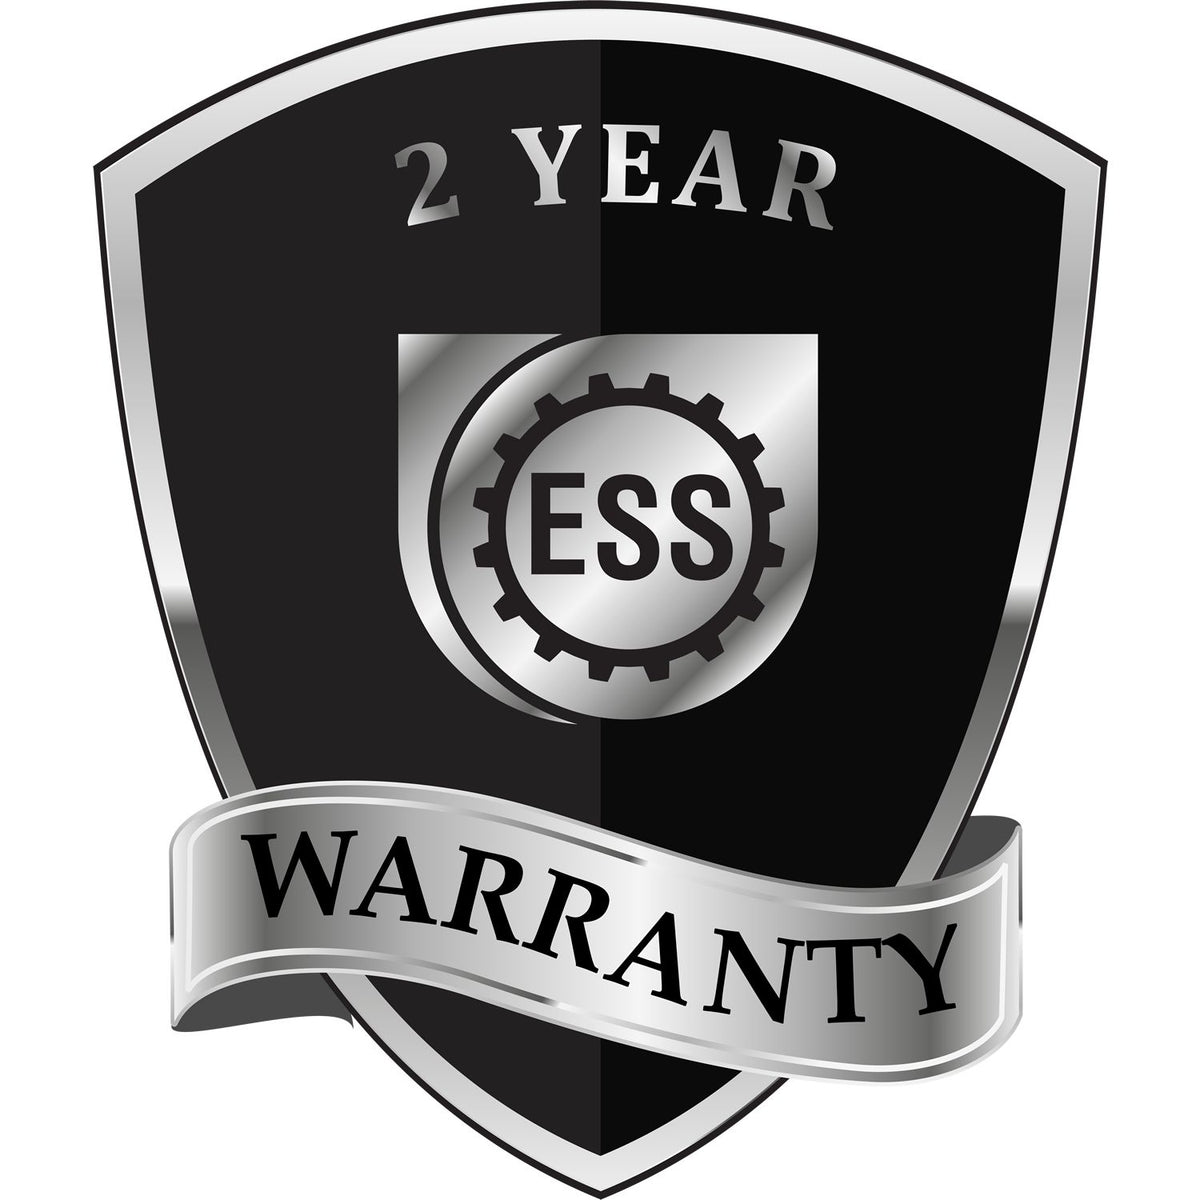 A black and silver badge or emblem showing warranty information for the Gift New York Land Surveyor Seal